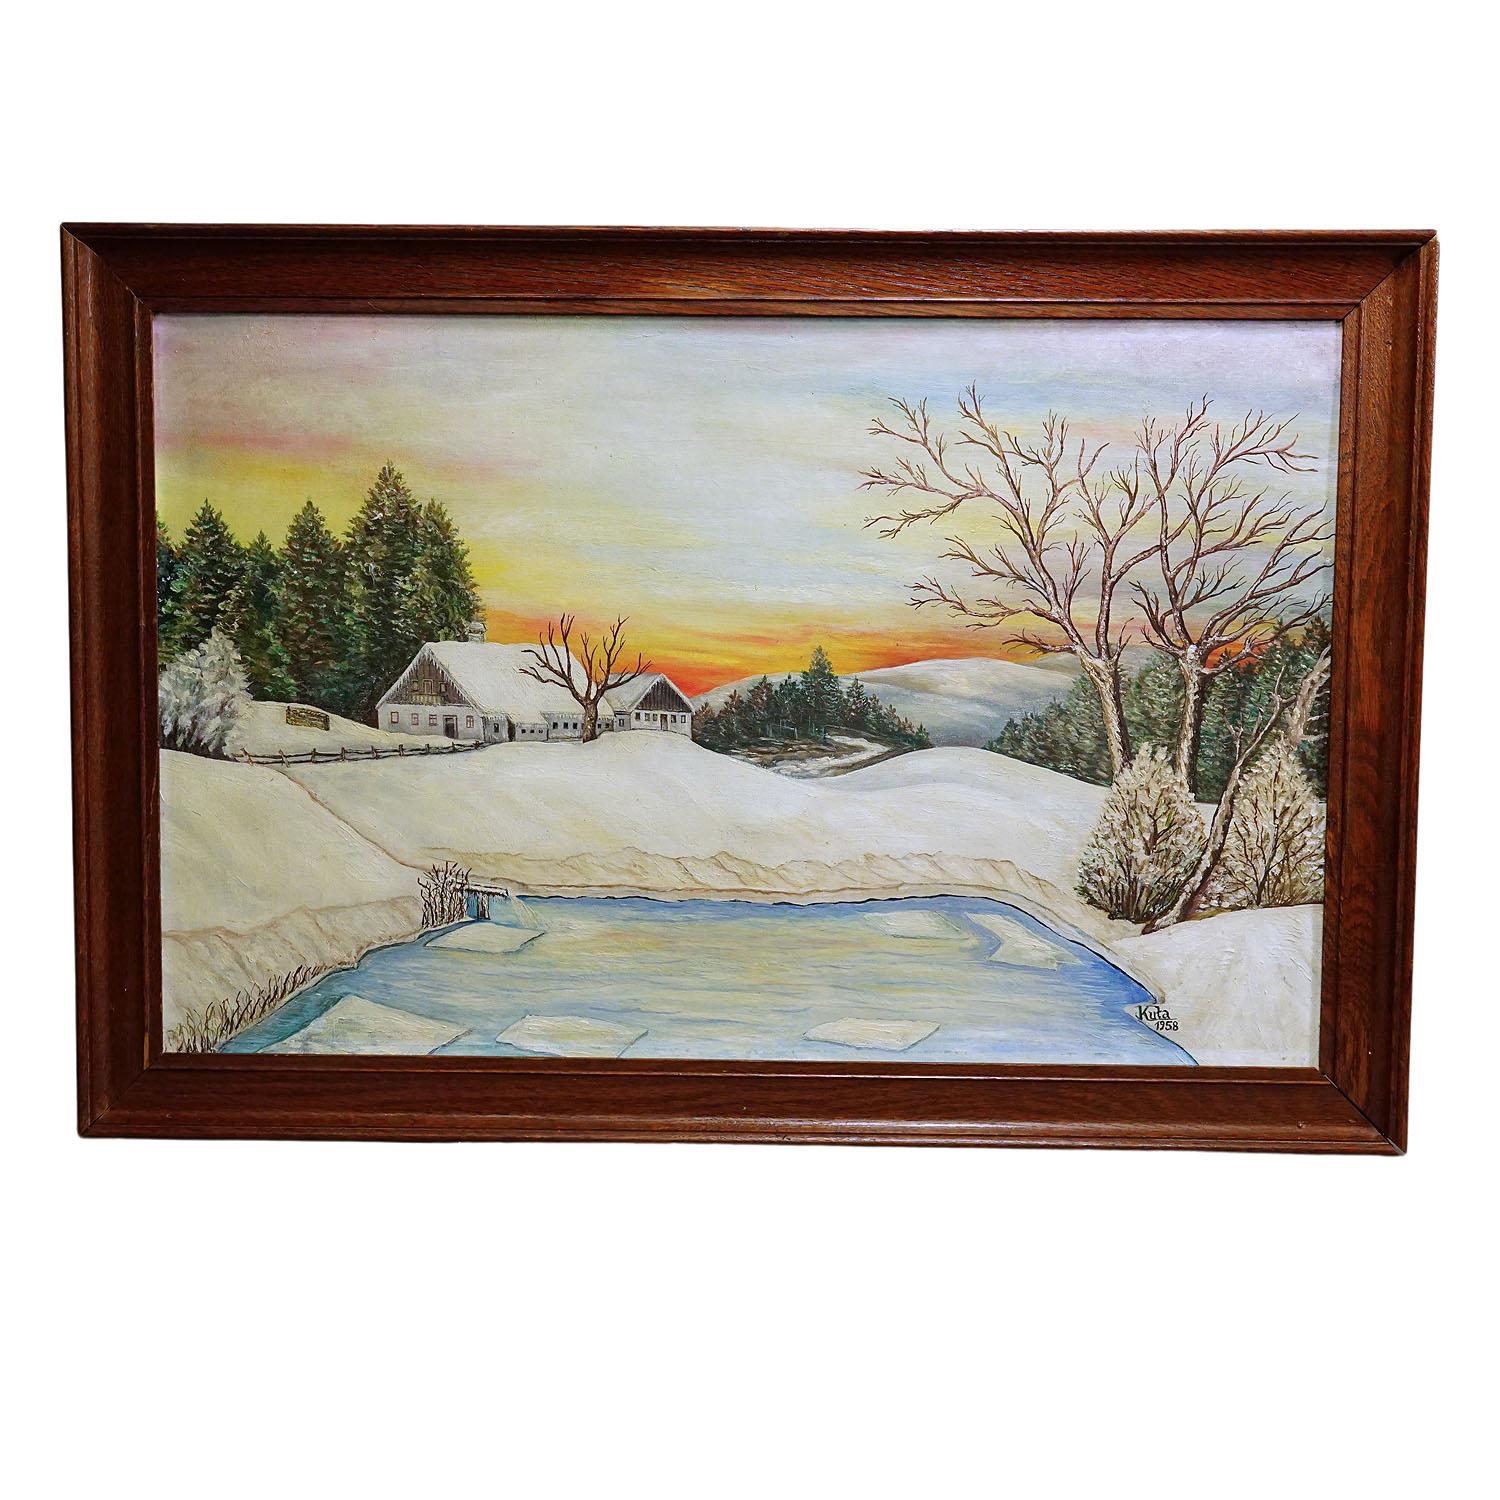 Sunrise in a Winterly Landscape in The Black Forest

An original vintage oil painting showing a sunrise in a winterly Black Forest landscape. Painted in oil on canvas, signed Kuta 1958. A great original painting in naive style. Good condition,